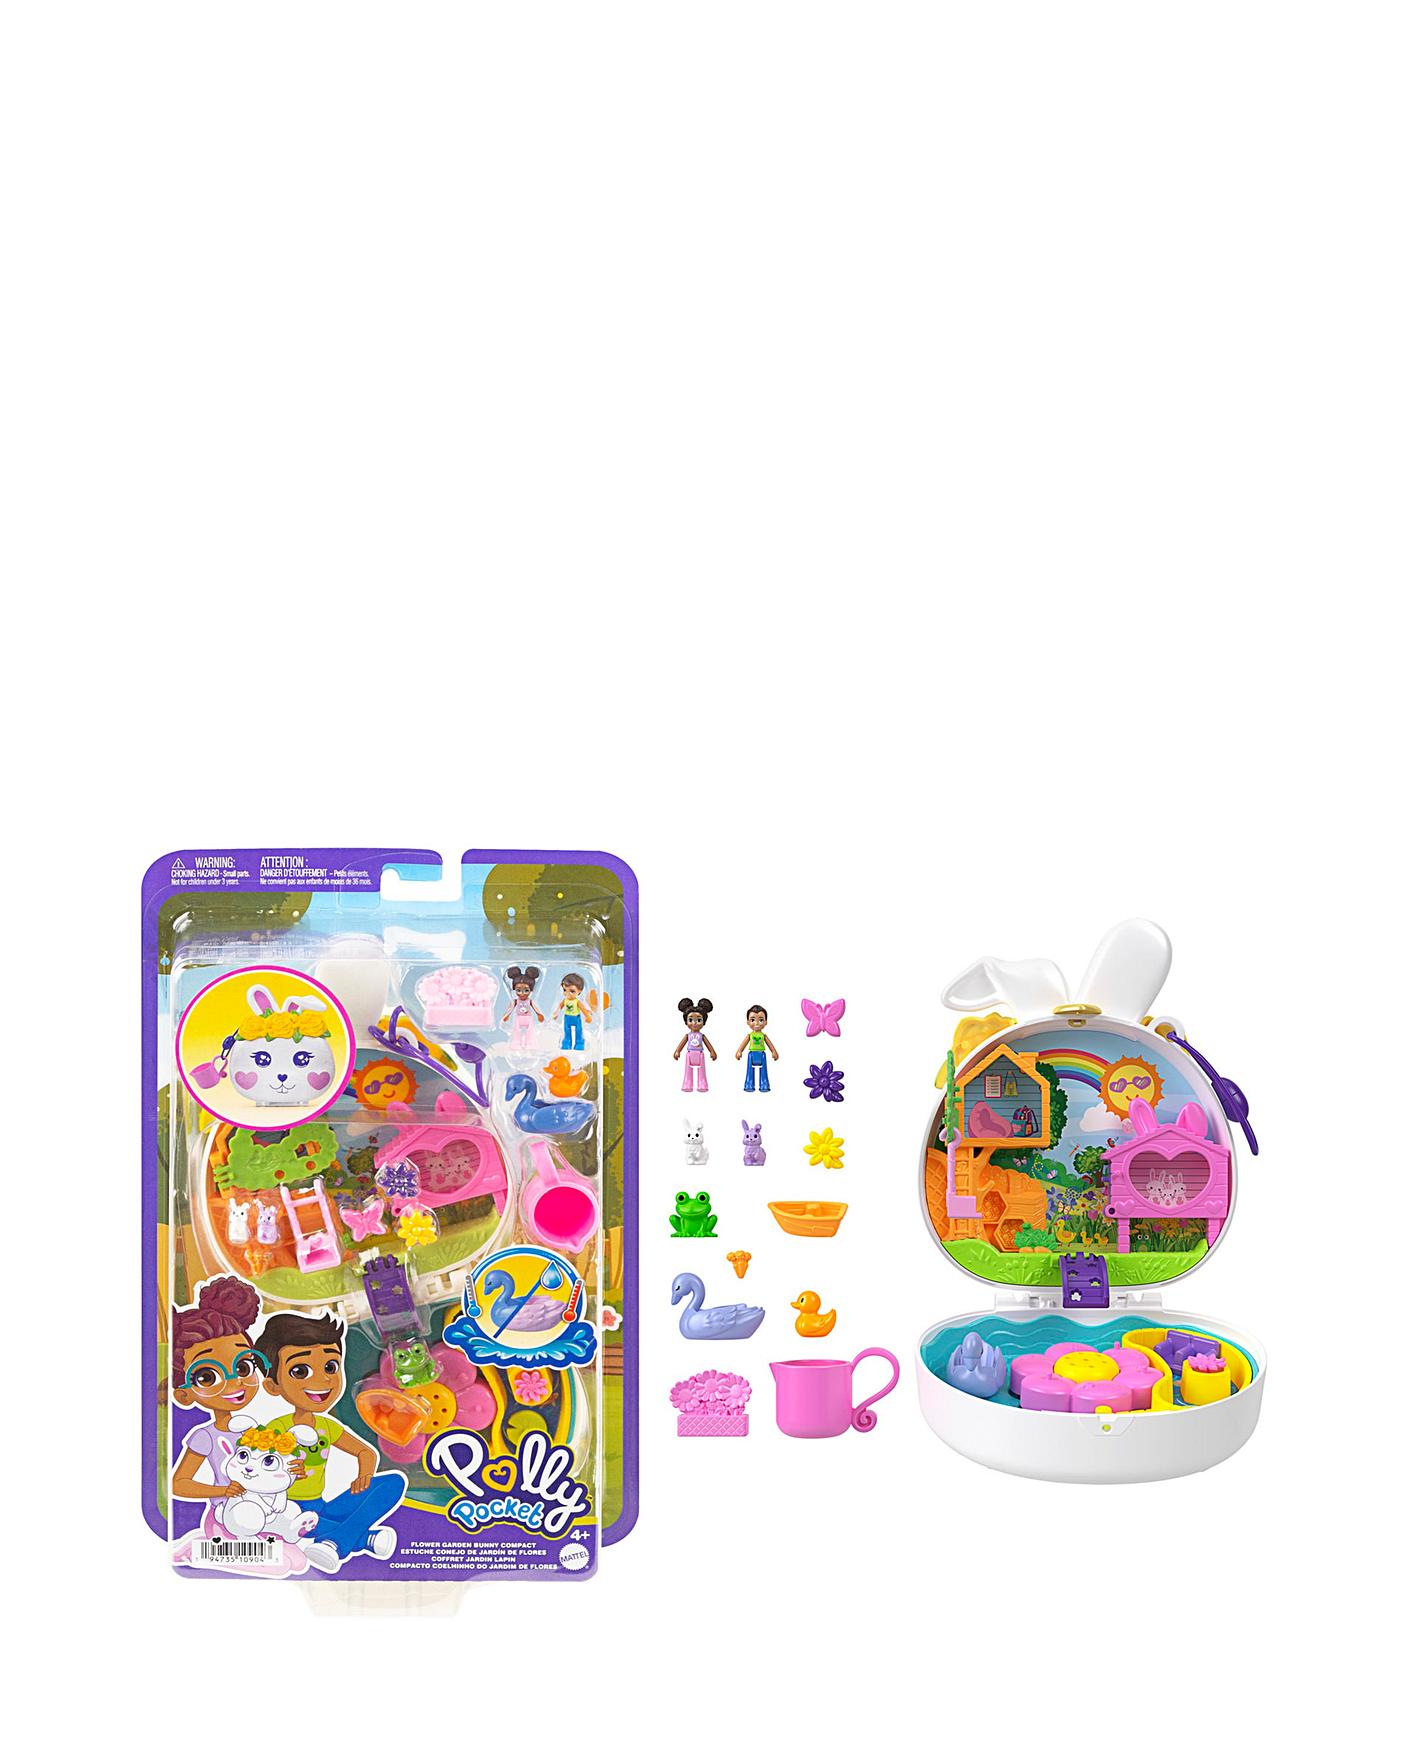 Polly Pocket Flip & Find Bunny Lapin Flip Feature & Micro Doll New